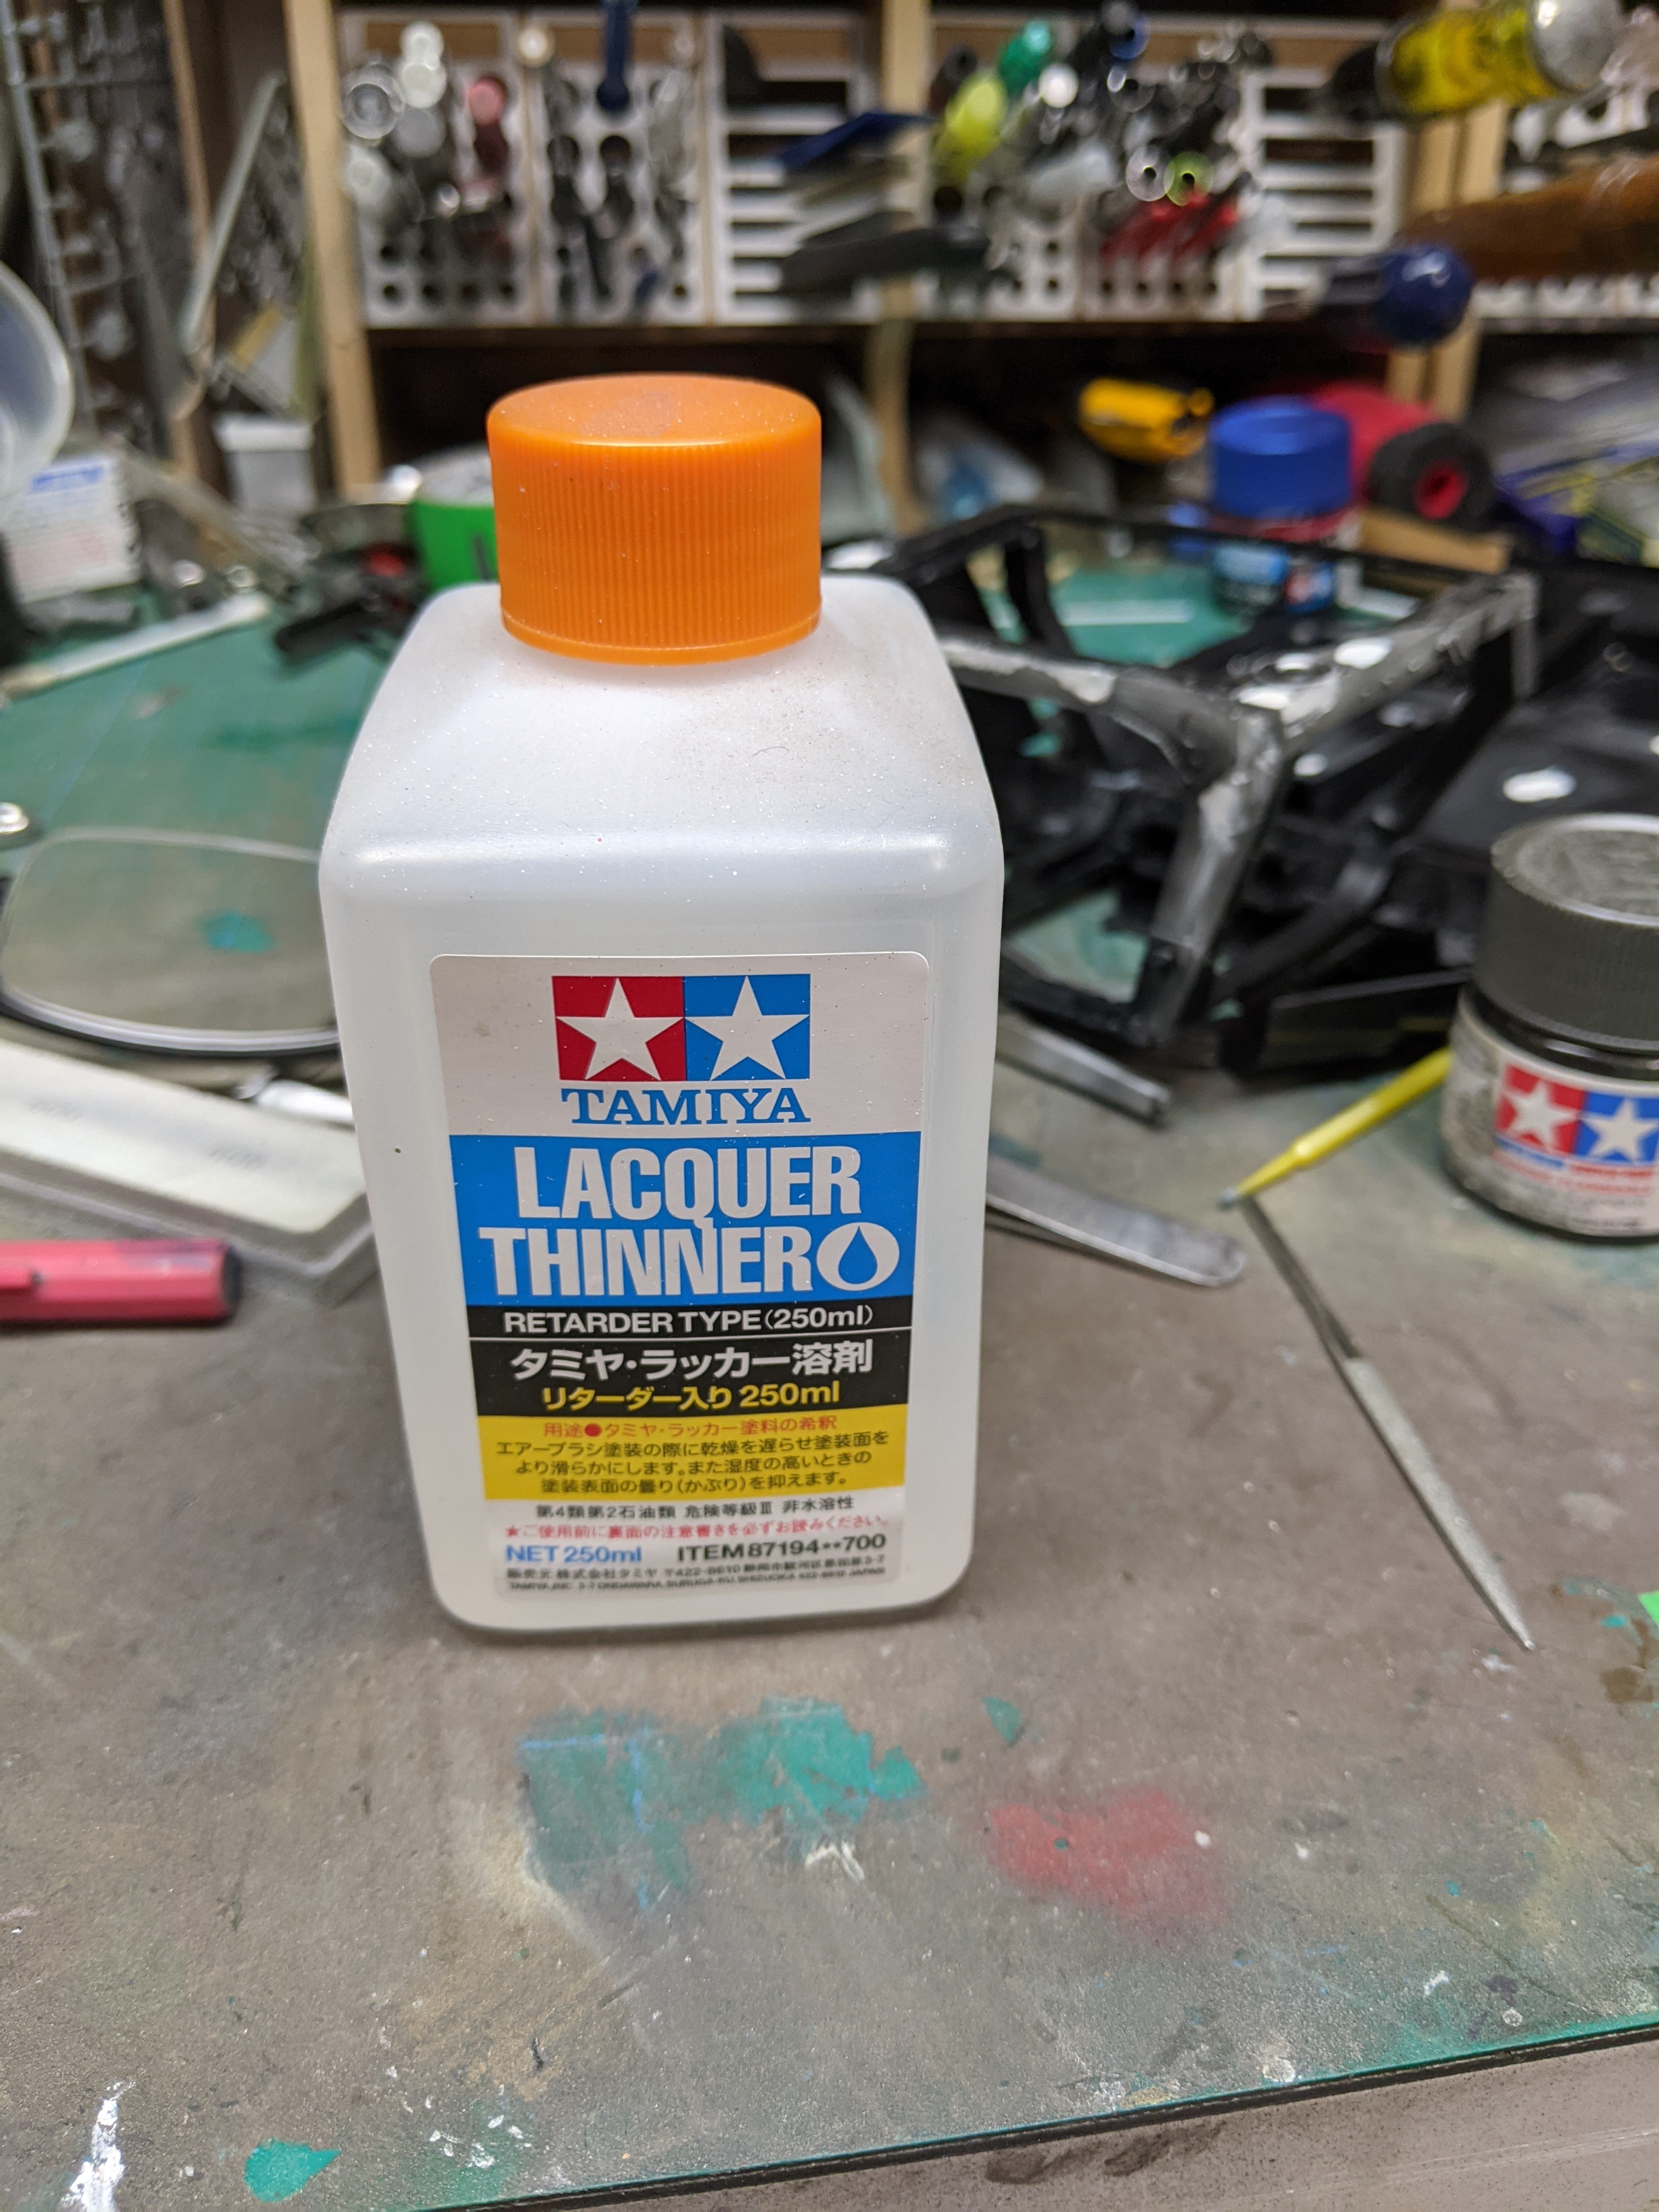 Mixing Tamiya paint with Mr. Color leveling thinner 